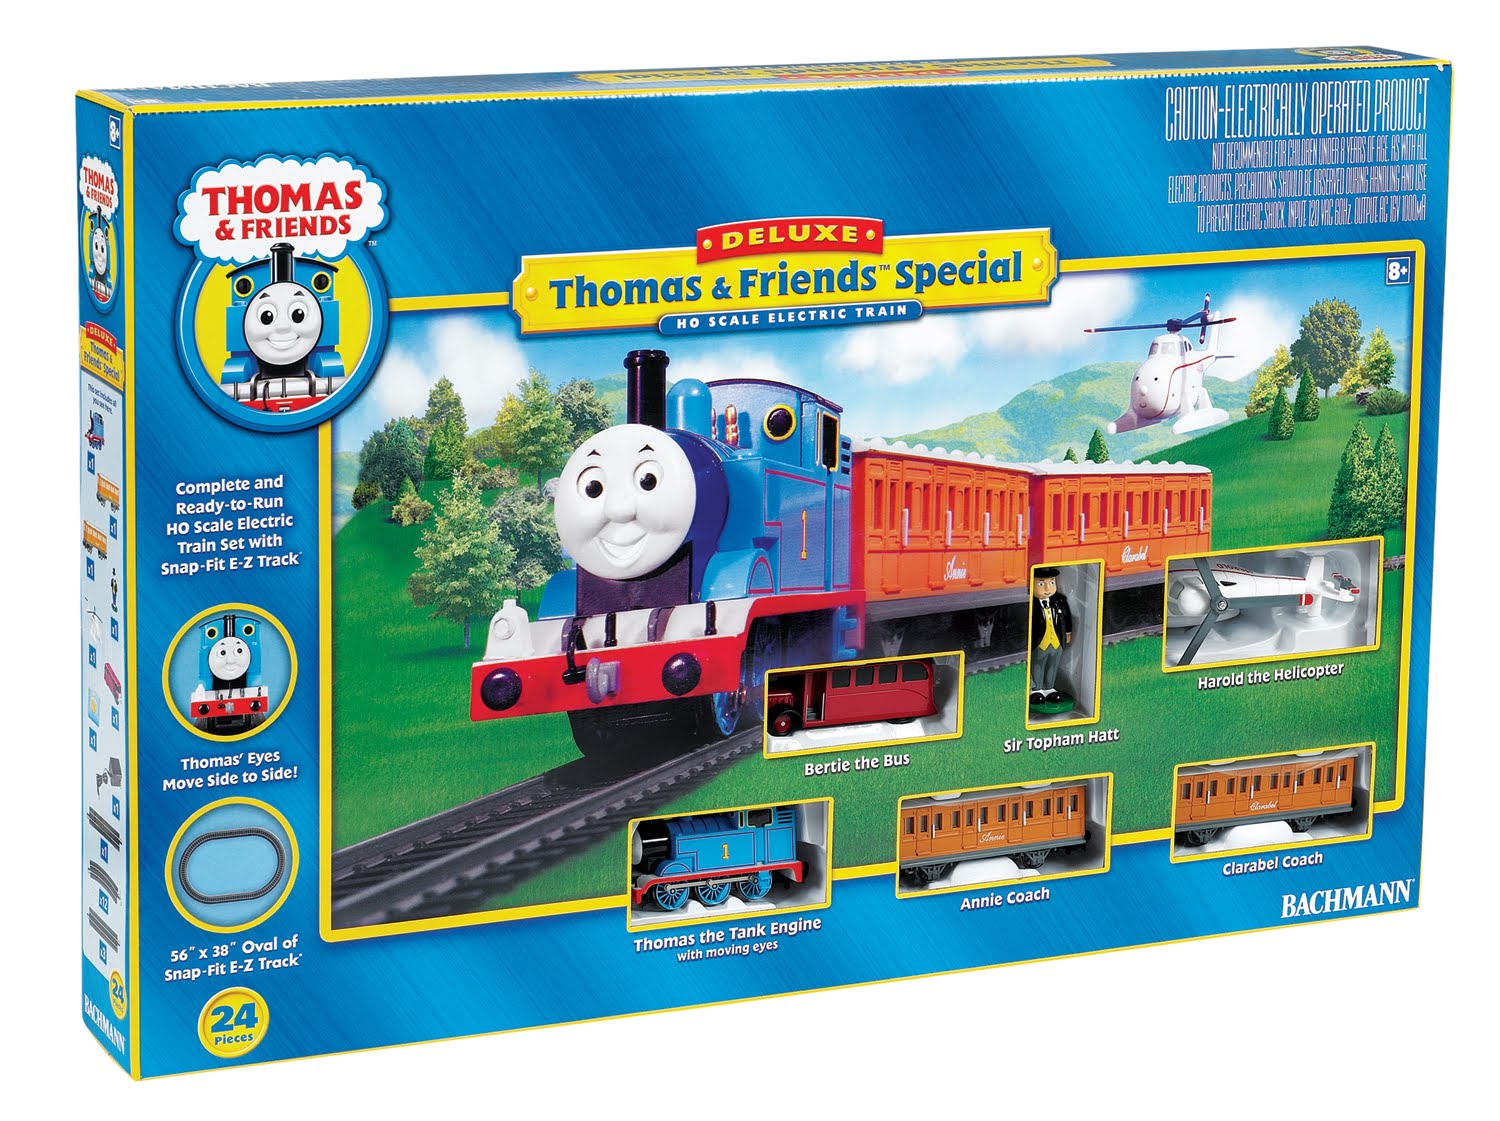 The Bachmann Trains Deluxe Thomas and Friends Special Ready-to-Run HO 